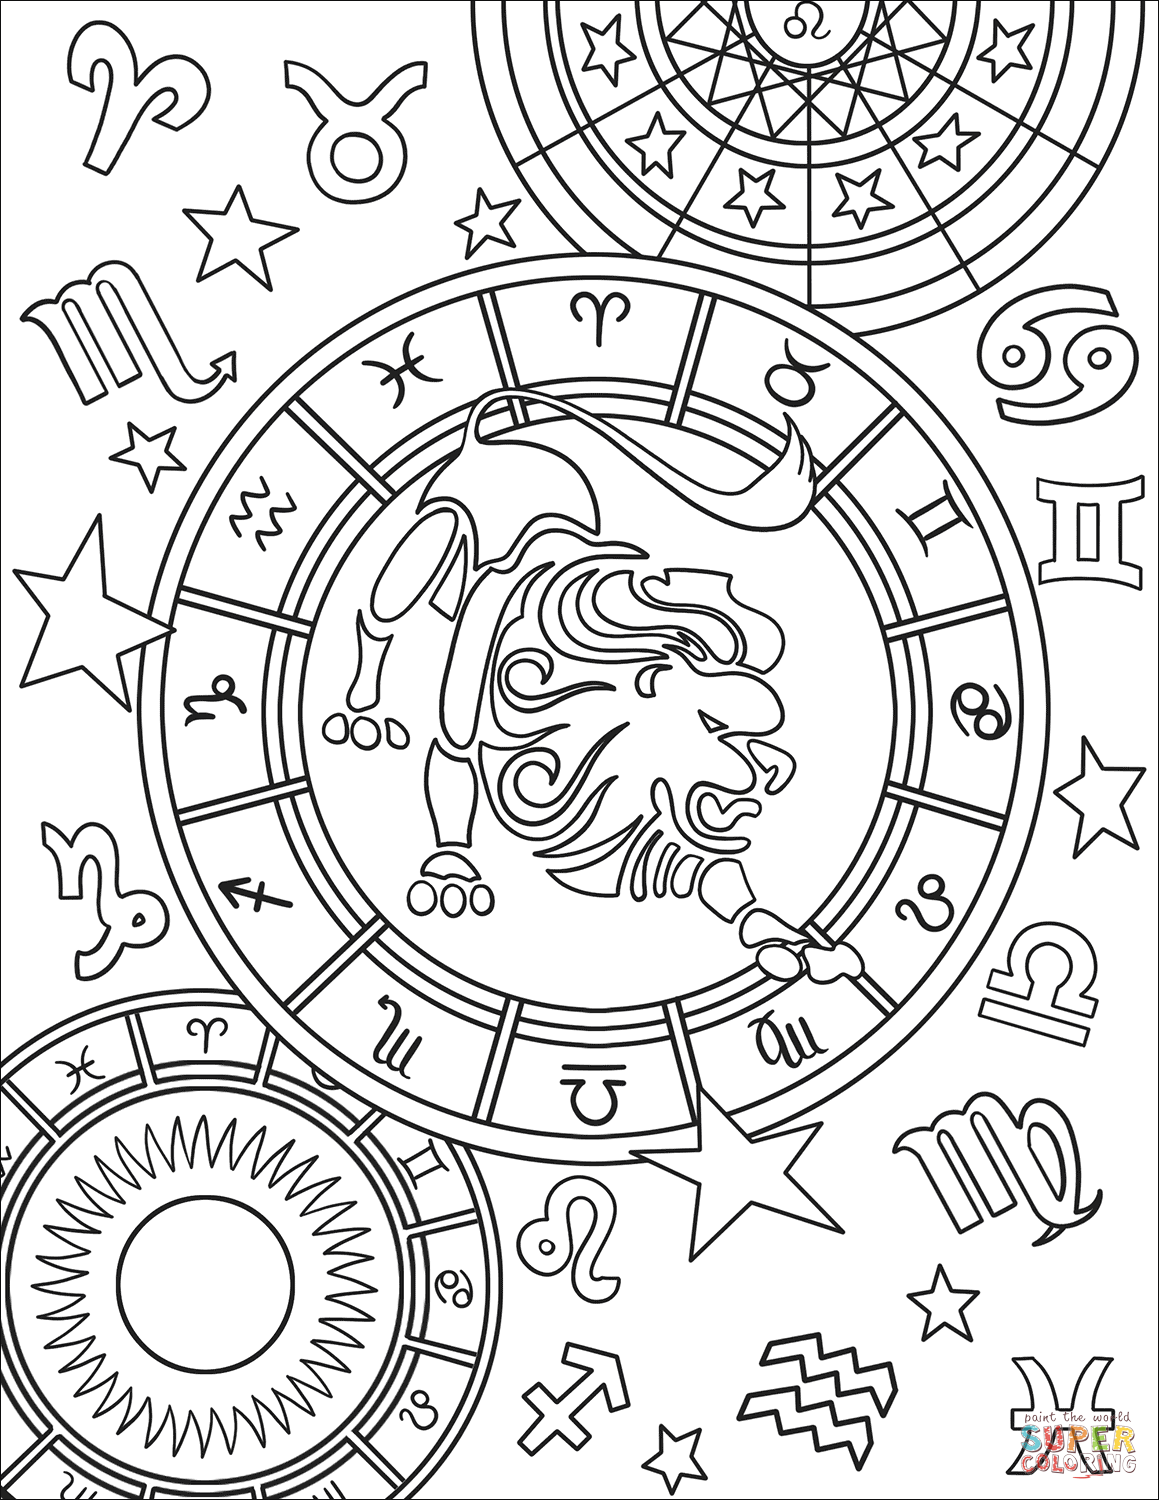 Horoscope Coloring Pages at Free printable colorings